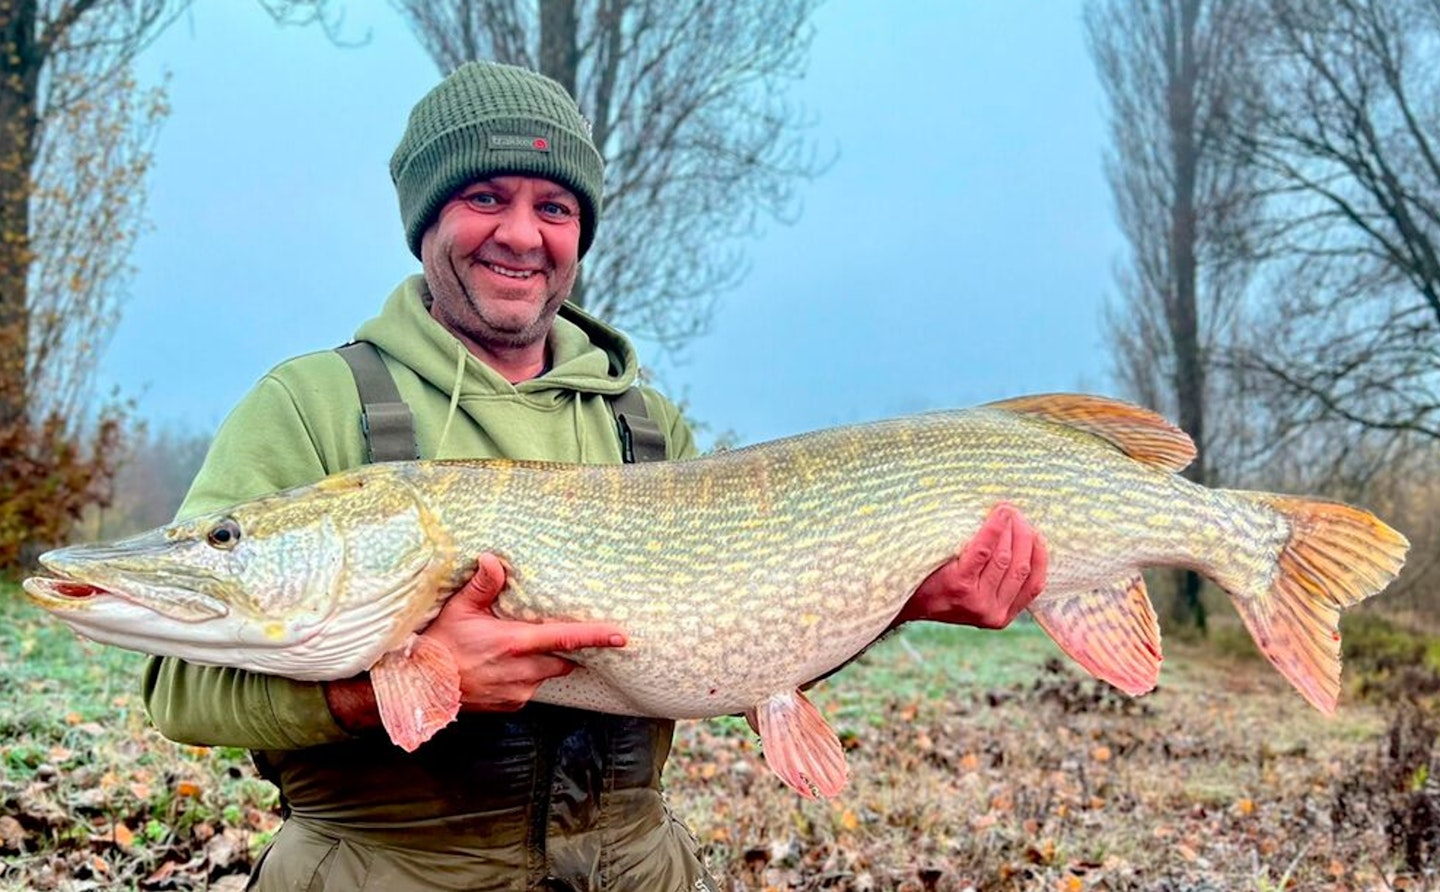 Nathan Long fished Chew Valley for this 36lb 8oz pike